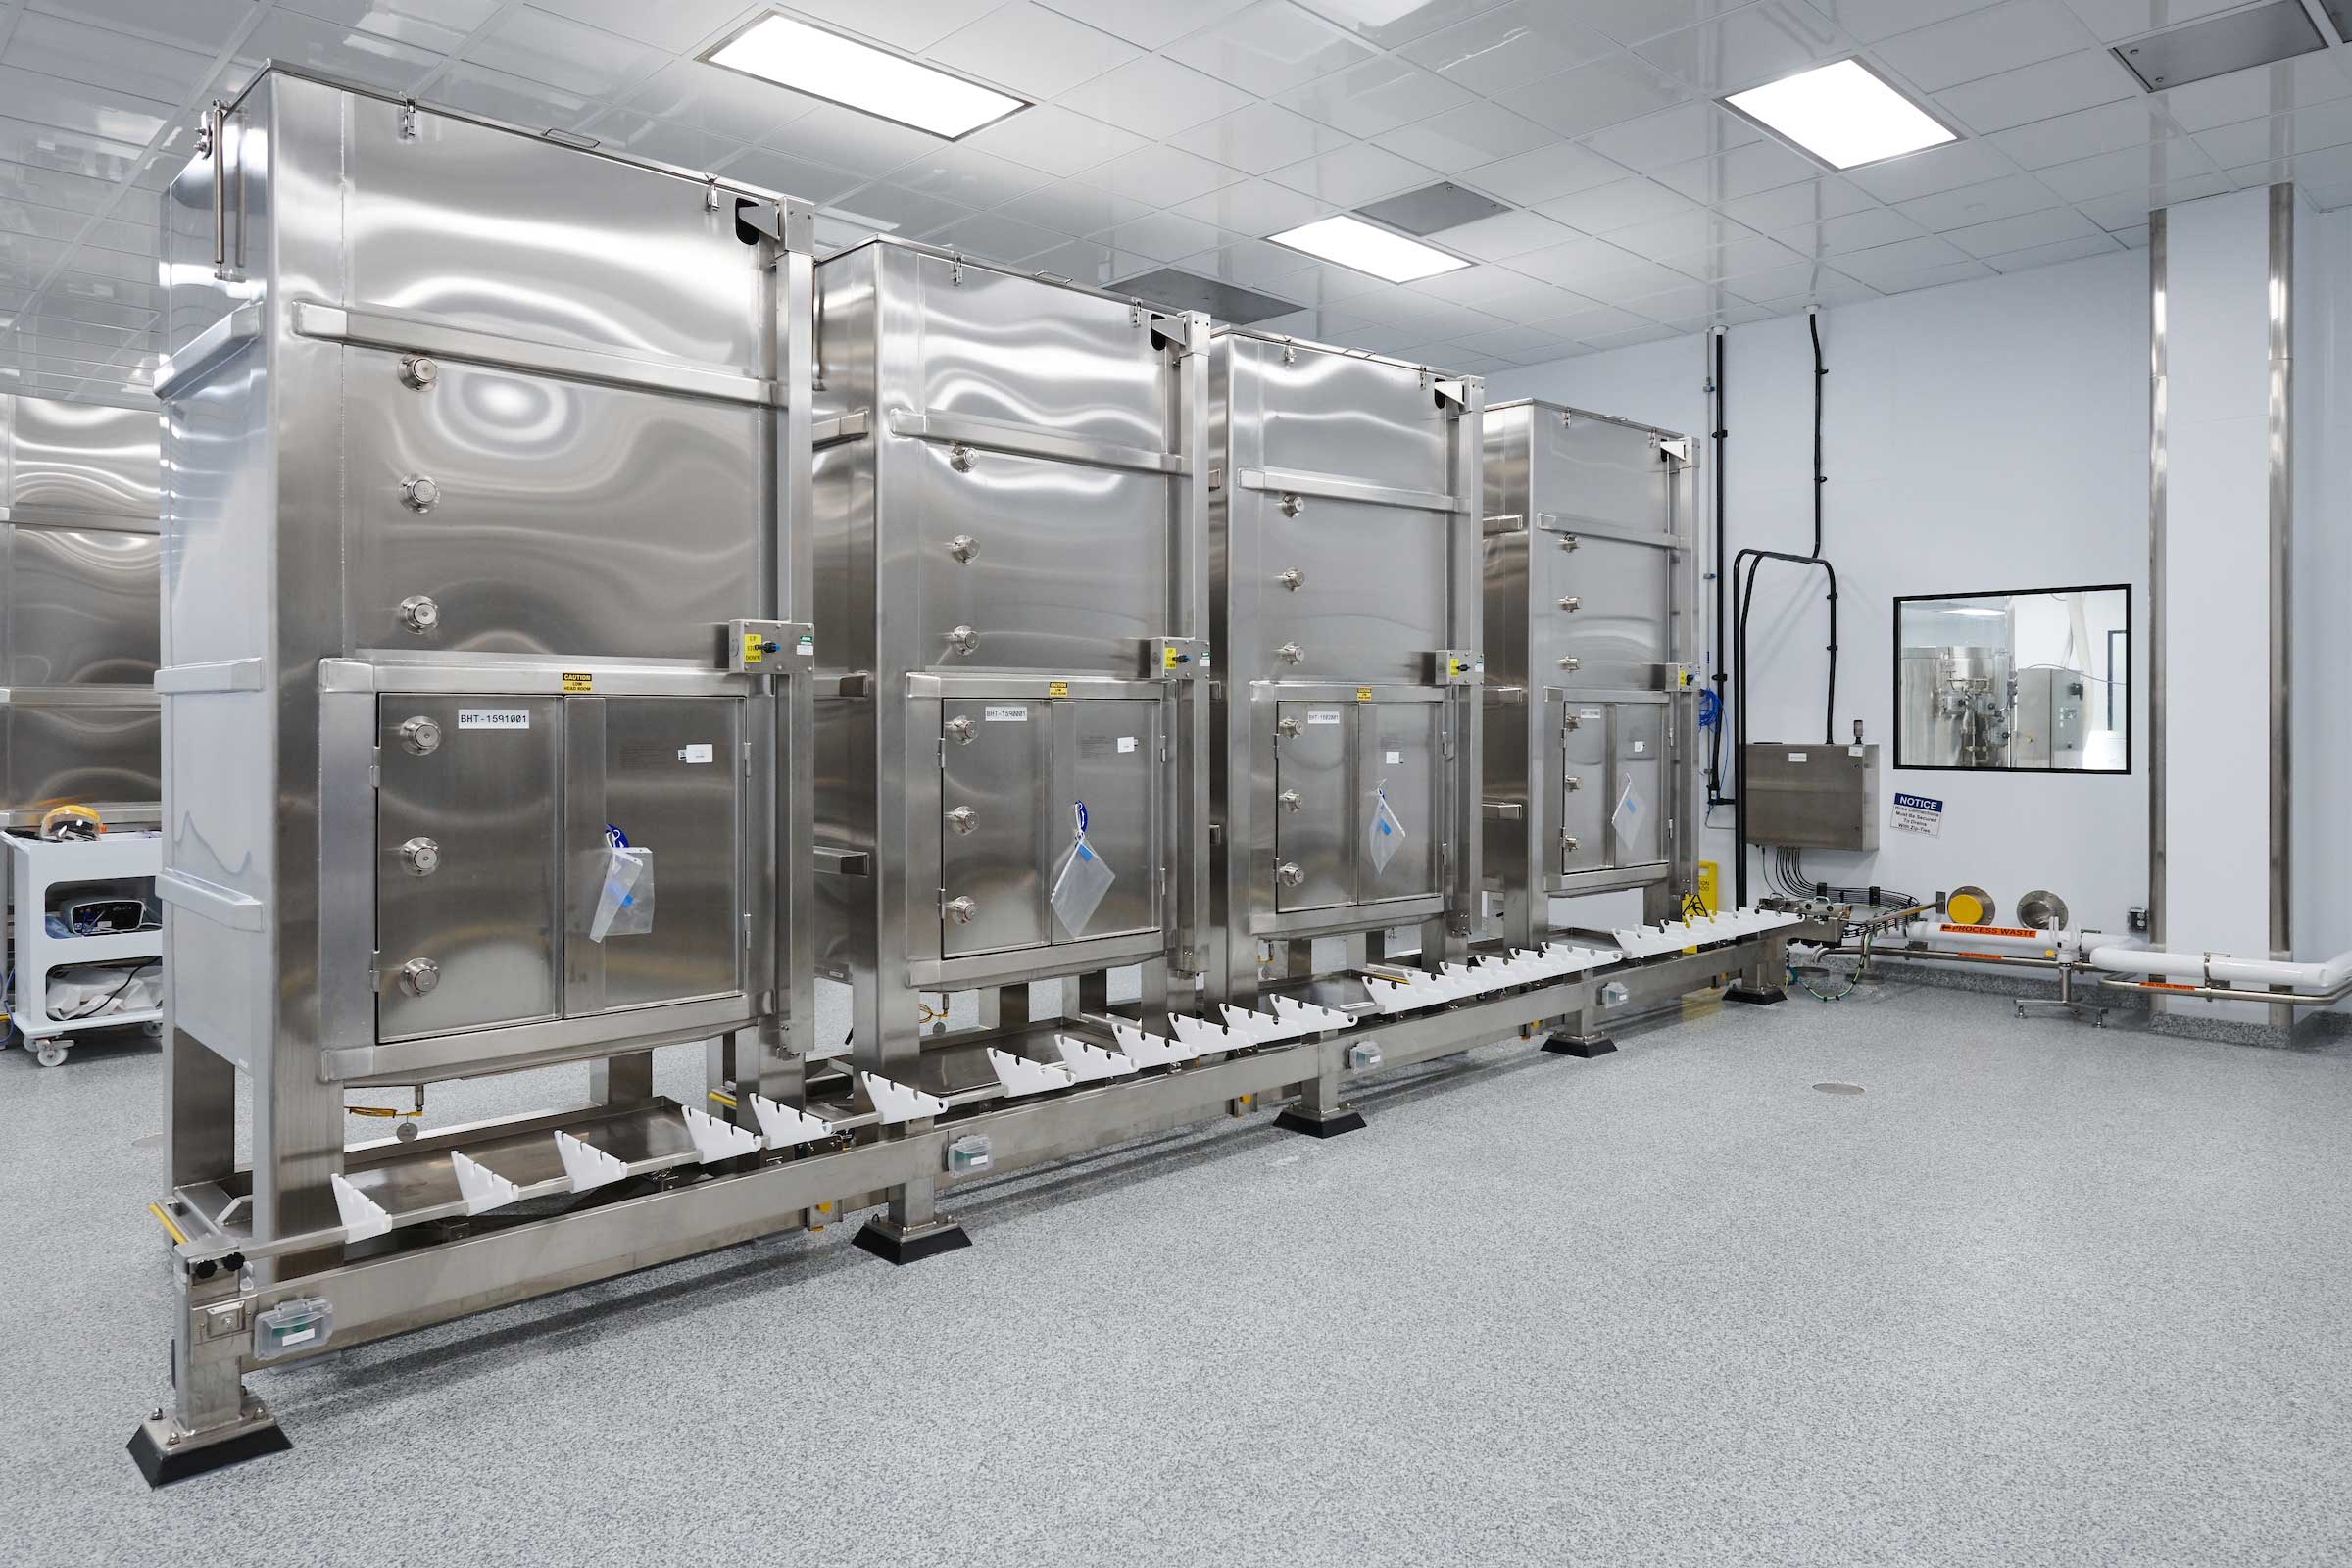 Sanofi opens its first digitally-enabled, continuous manufacturing facility; ushers in next generation of biotech manufacturing